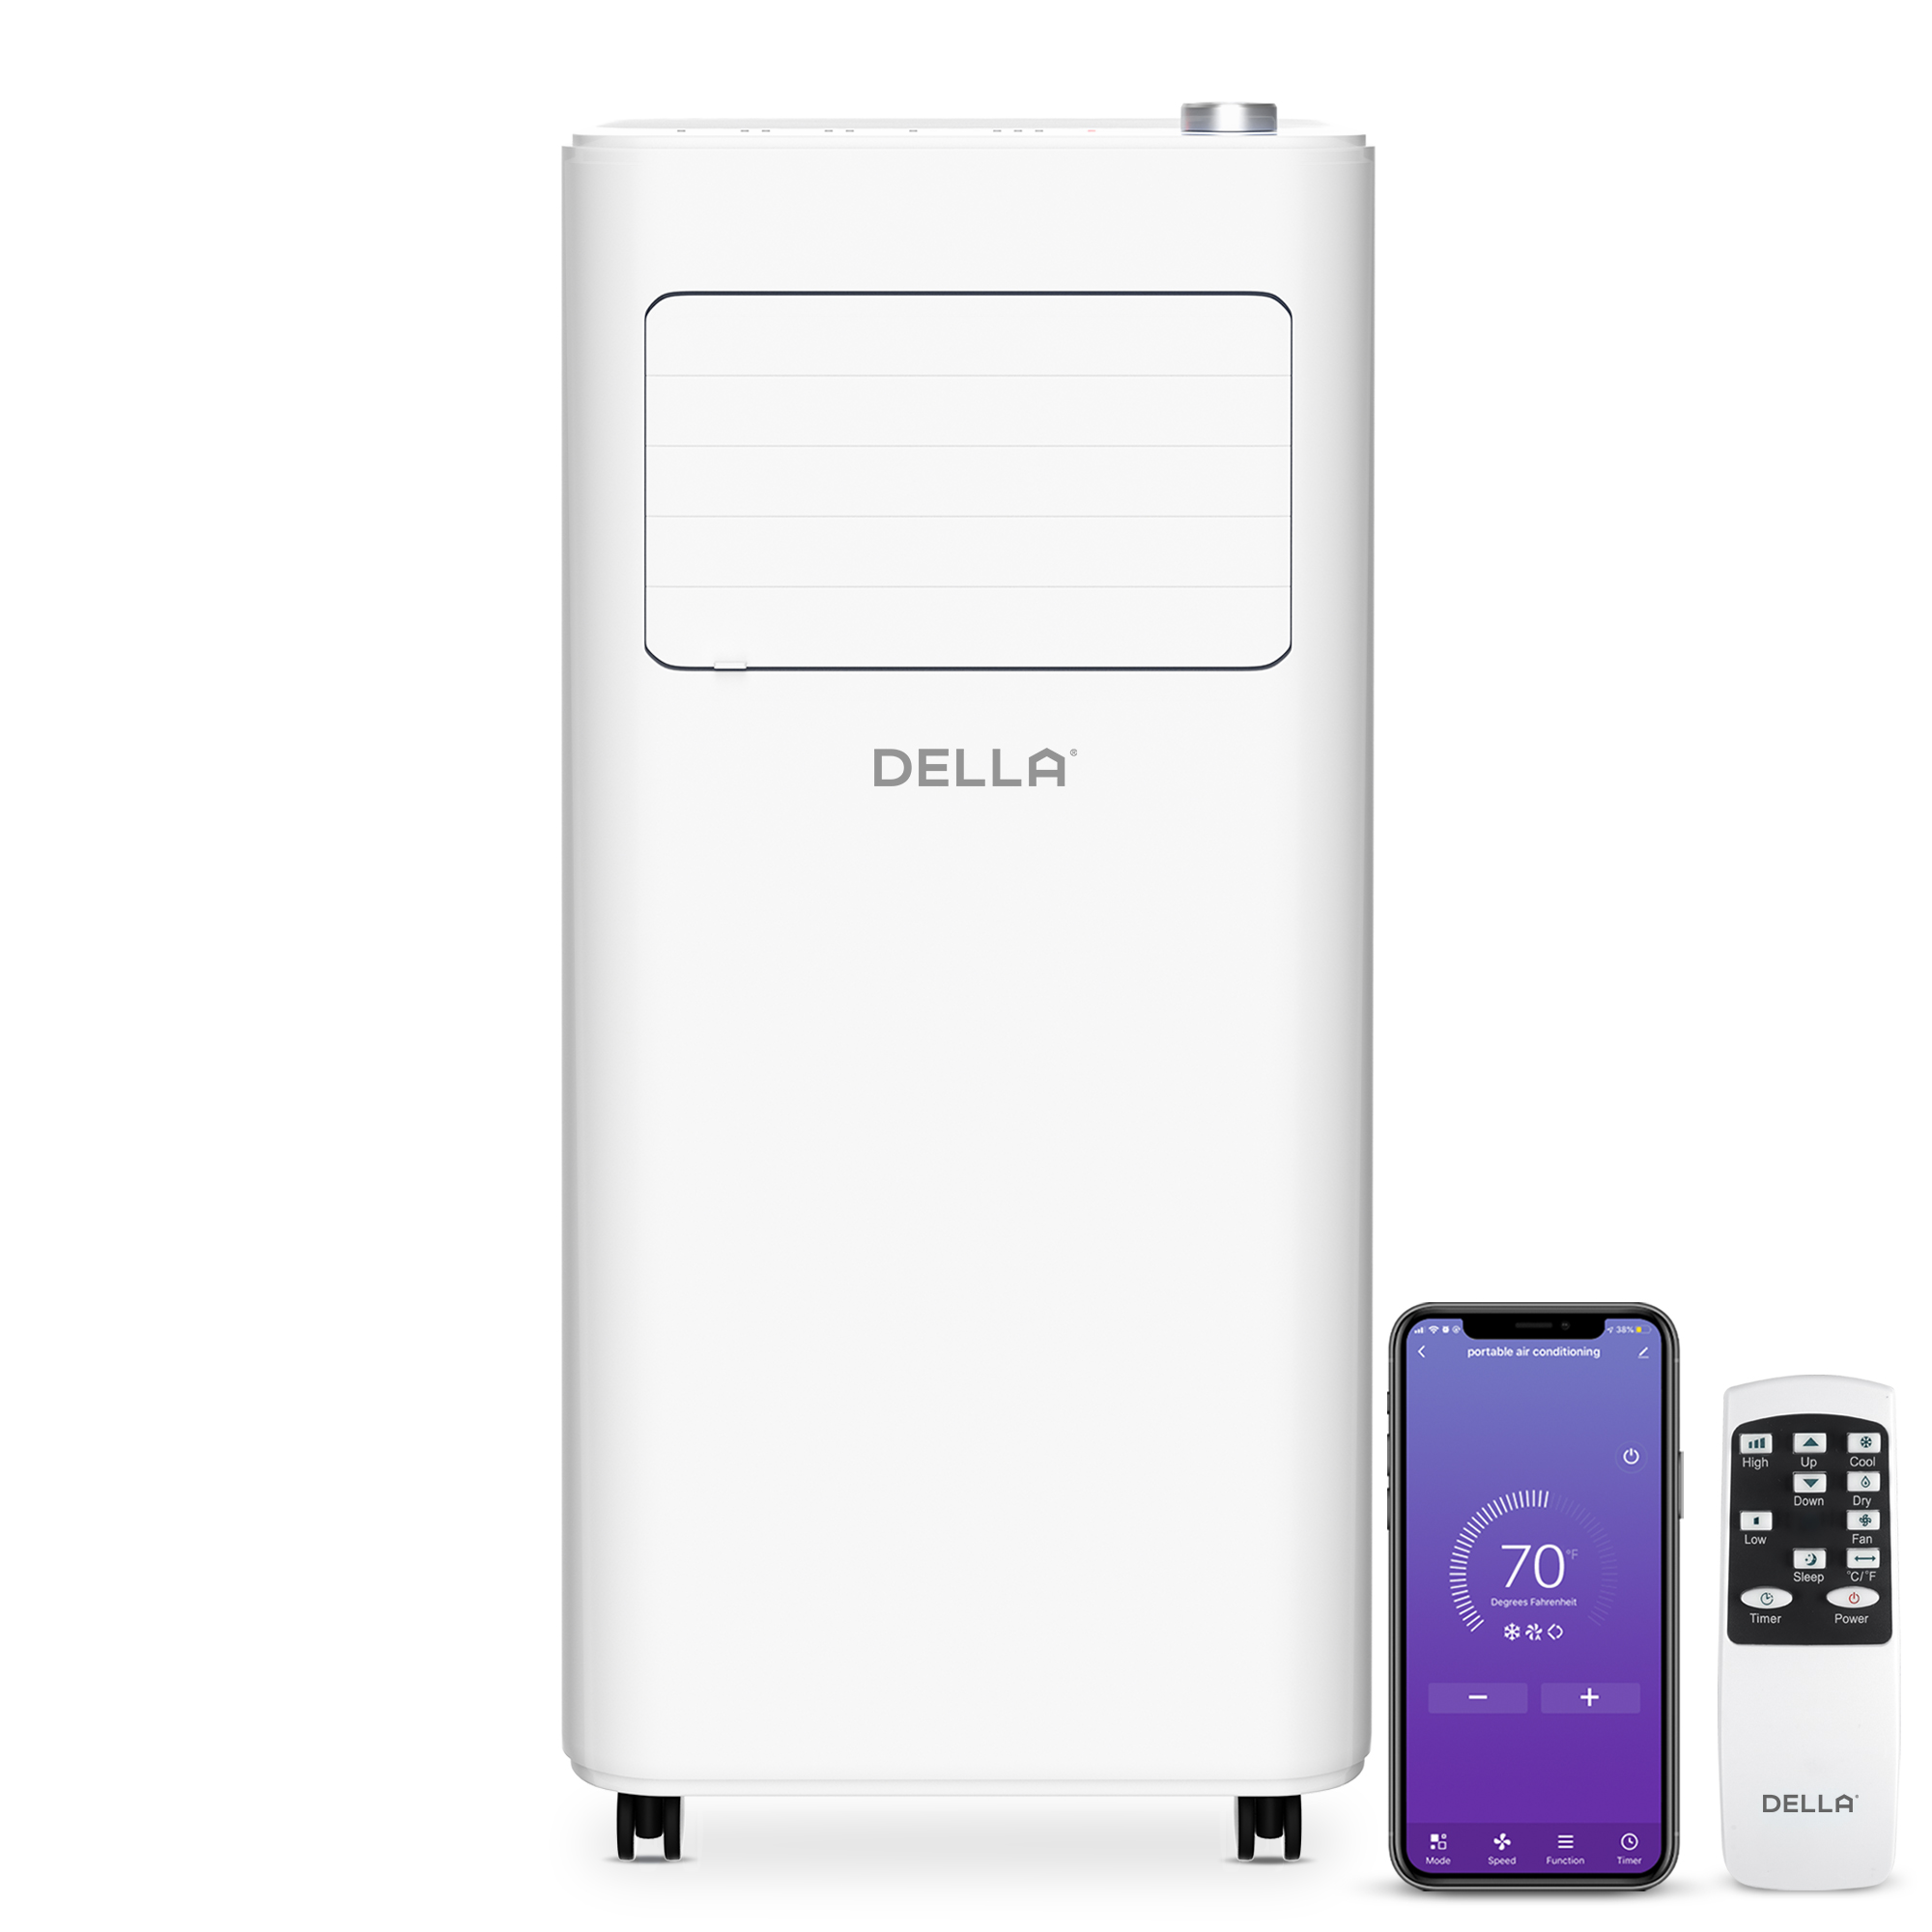 DELLA 8000 BTU ASHRAE/5000 BTU(SACC) Smart Wifi Enabled Portable Air Conditioner, Cooling, Dehumidifier & Fan Portable AC Unit with Remote Control Window Kit, Cools up to 350 Sq. ft. - image 1 of 7